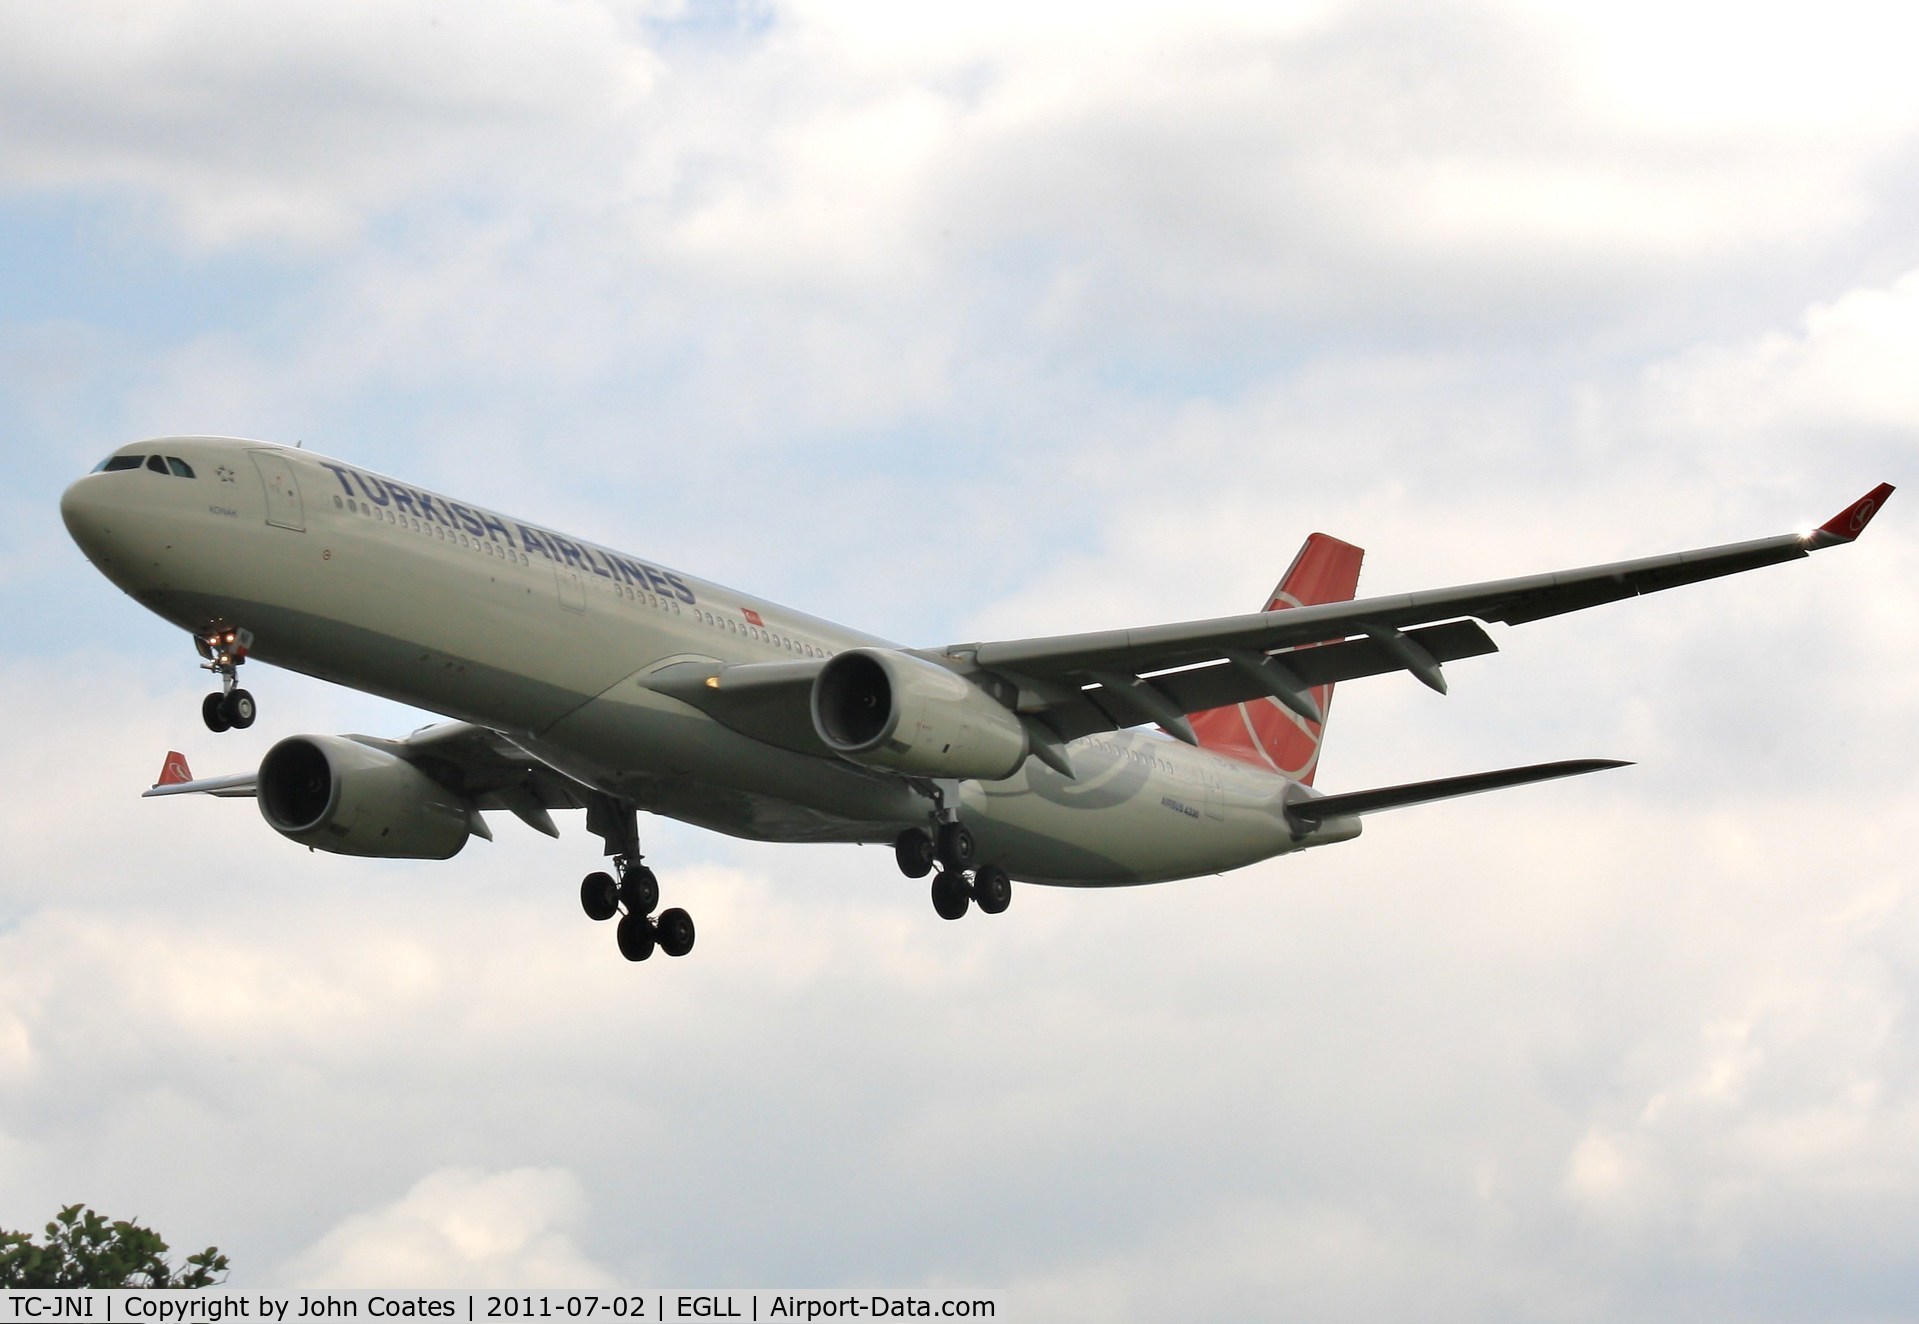 TC-JNI, 2010 Airbus A330-343X C/N 1160, On approach to 27L